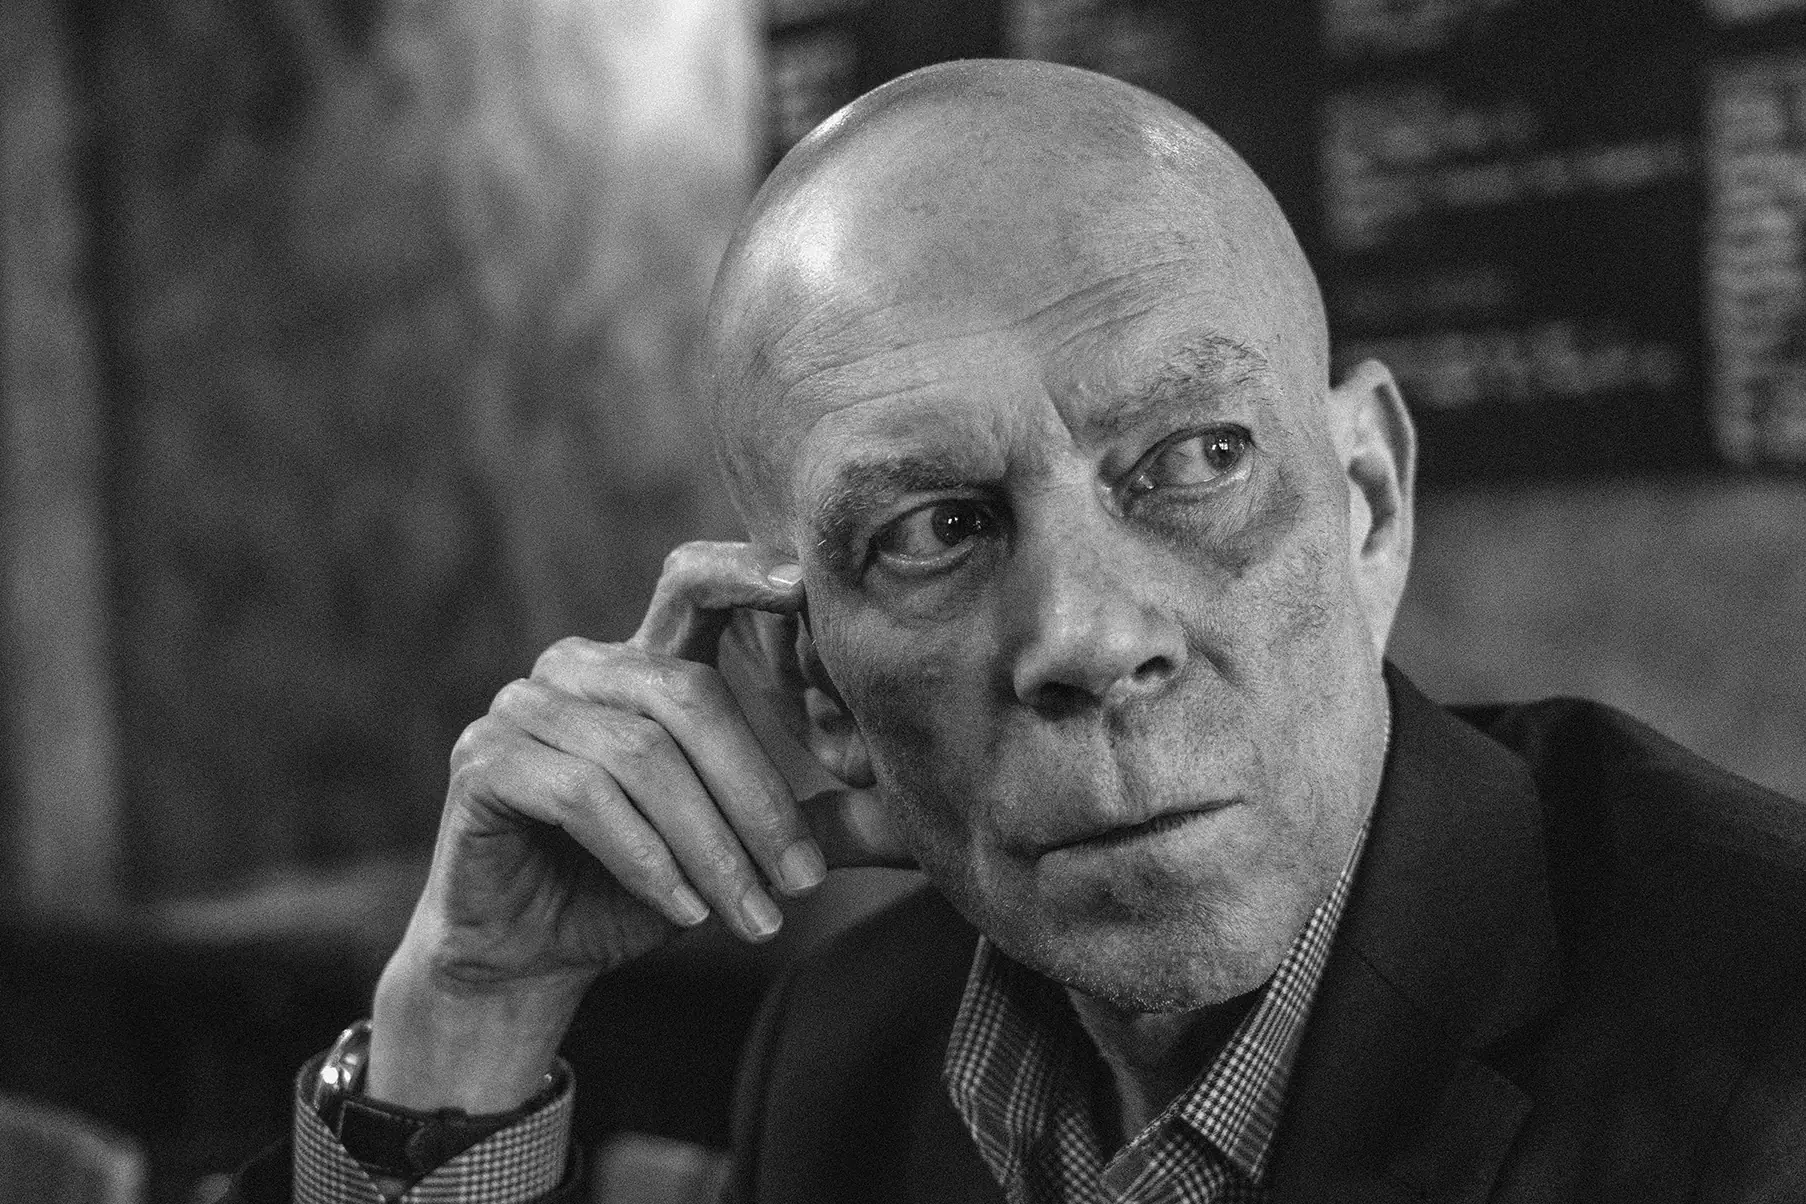 VINCE CLARKE announces his debut solo album ‘Songs of Silence’ – Watch the video for first track ‘The Lamentations of Jeremiah’